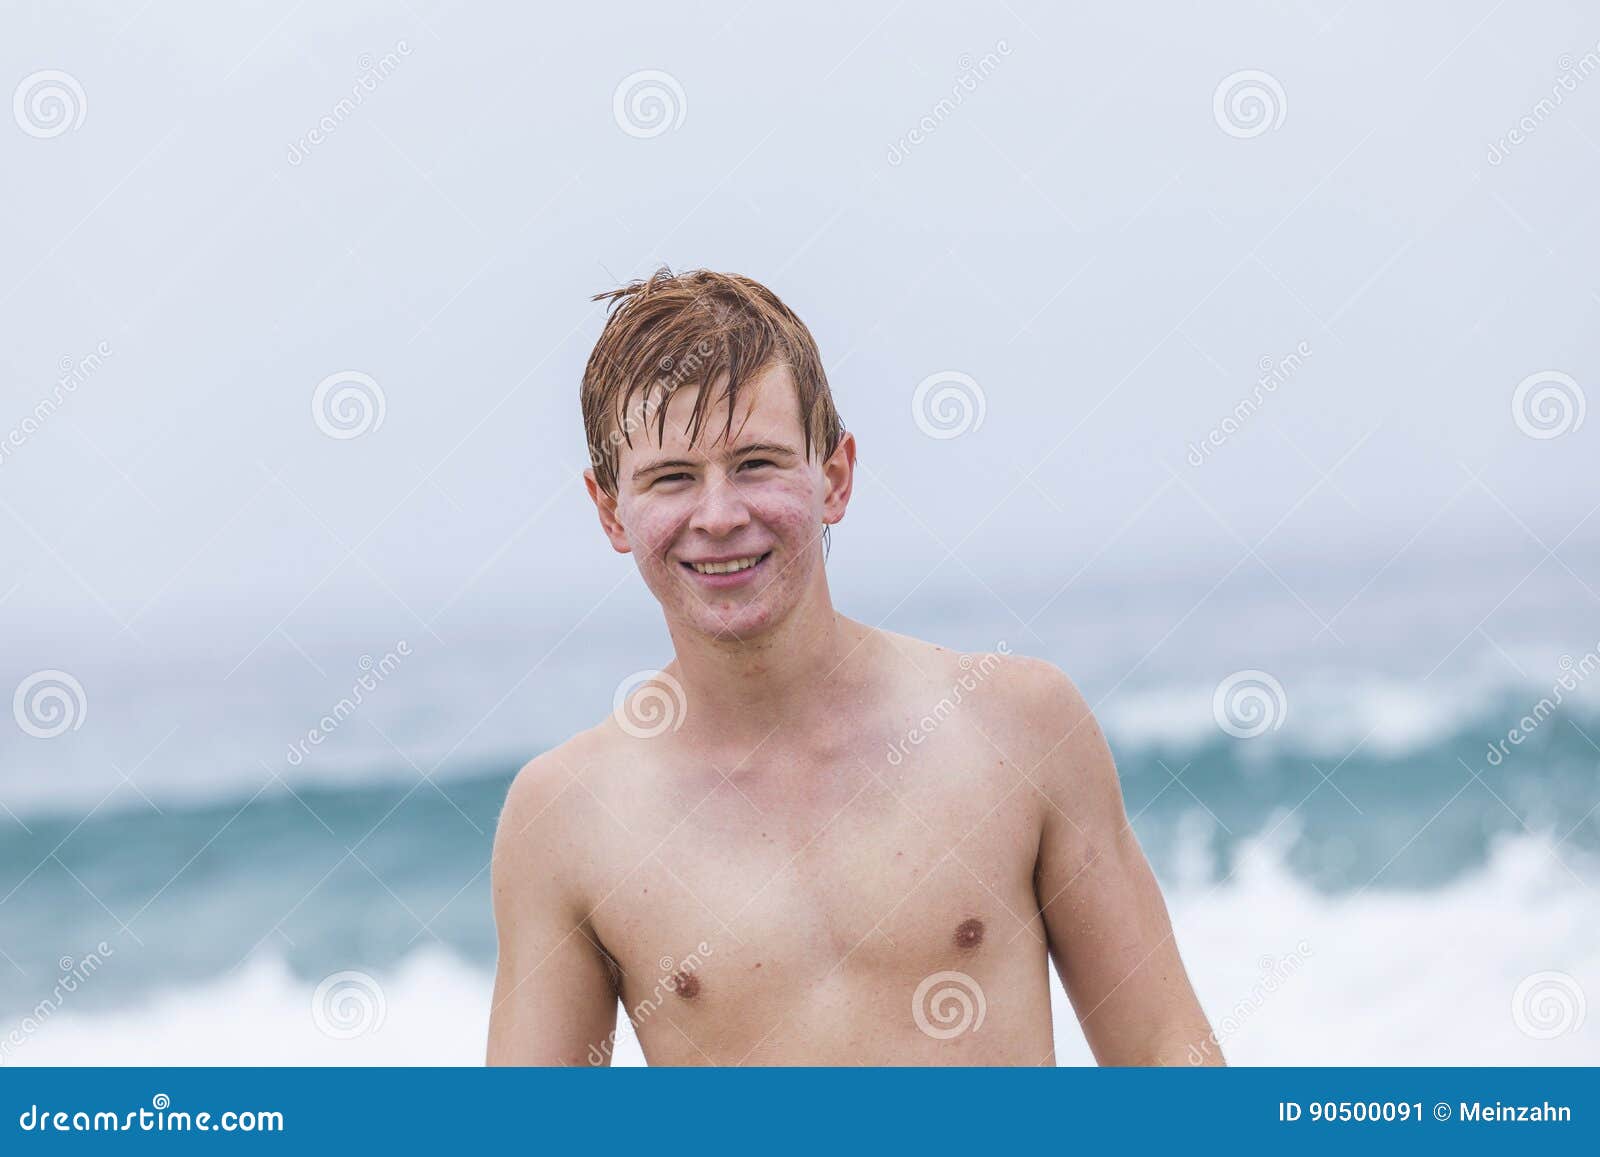 Young boy at the beach stock image. Image of adolescent - 90500091